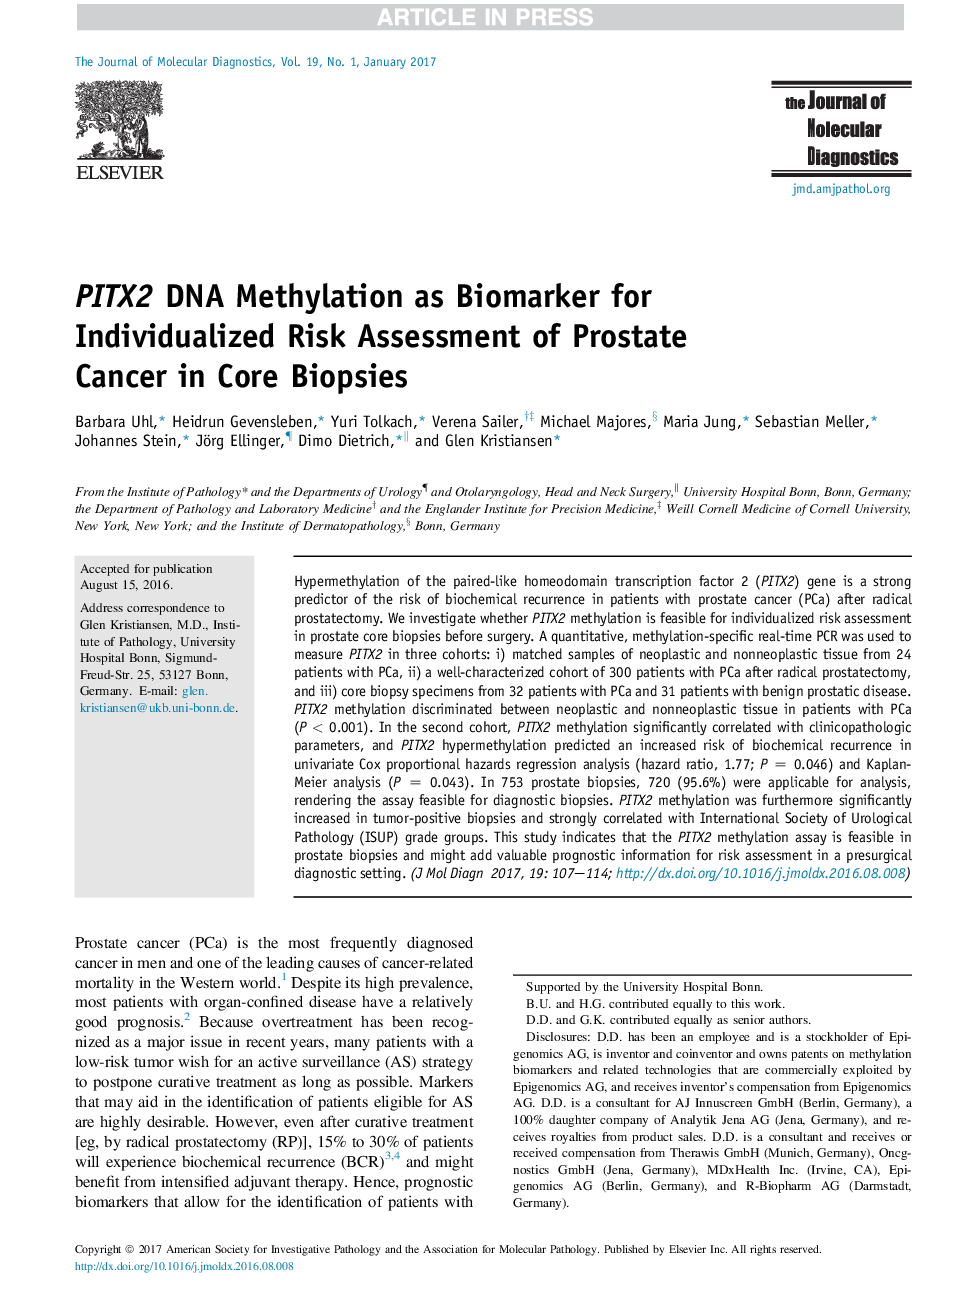 PITX2 DNA Methylation as Biomarker for Individualized Risk Assessment of Prostate Cancer in Core Biopsies